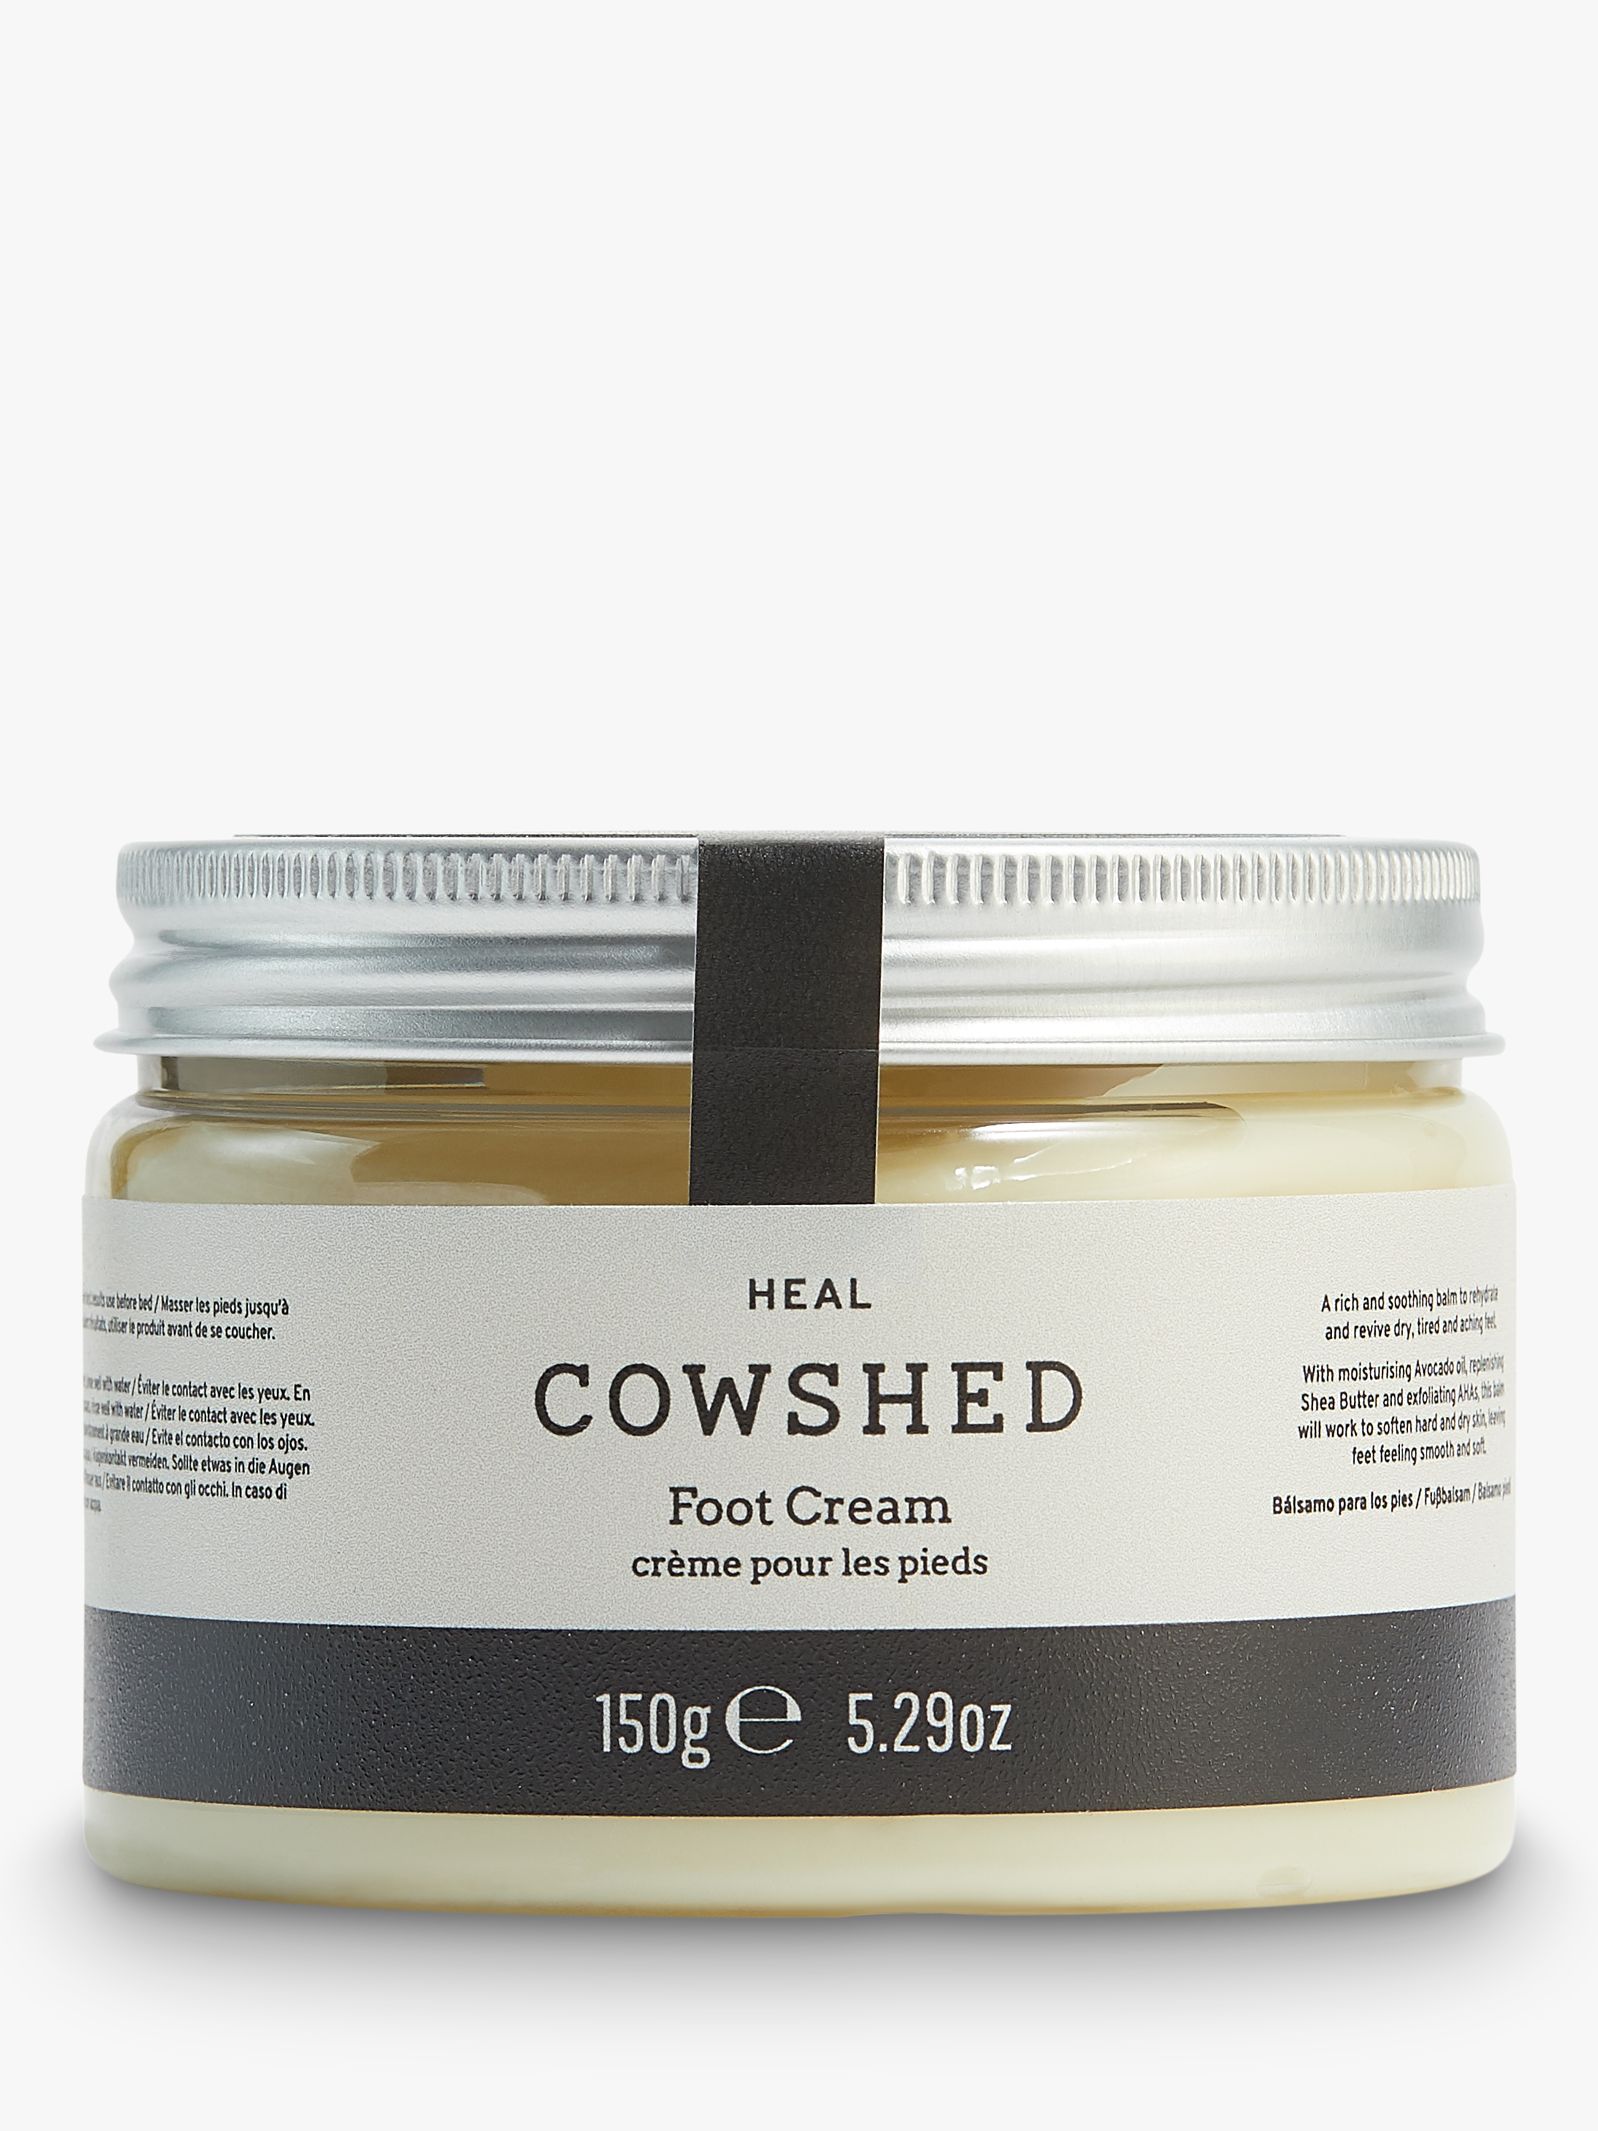 Cowshed Heal Foot Cream, 150g 1